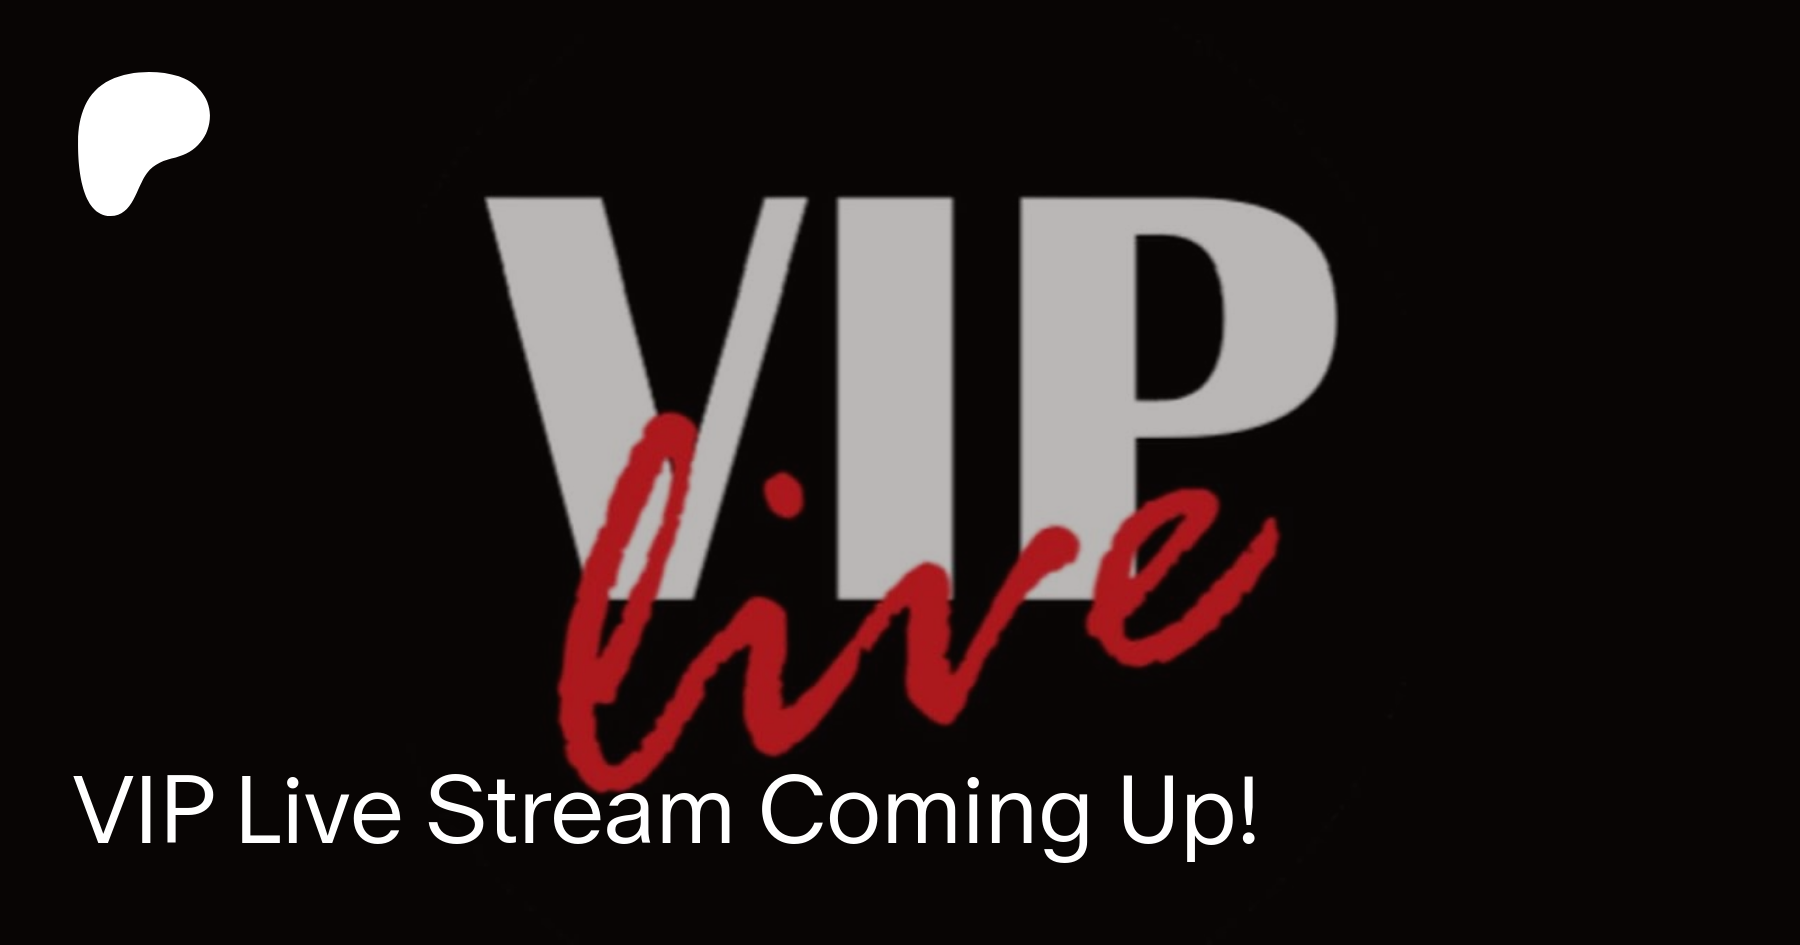 VIP Live Stream Coming Up! Patreon